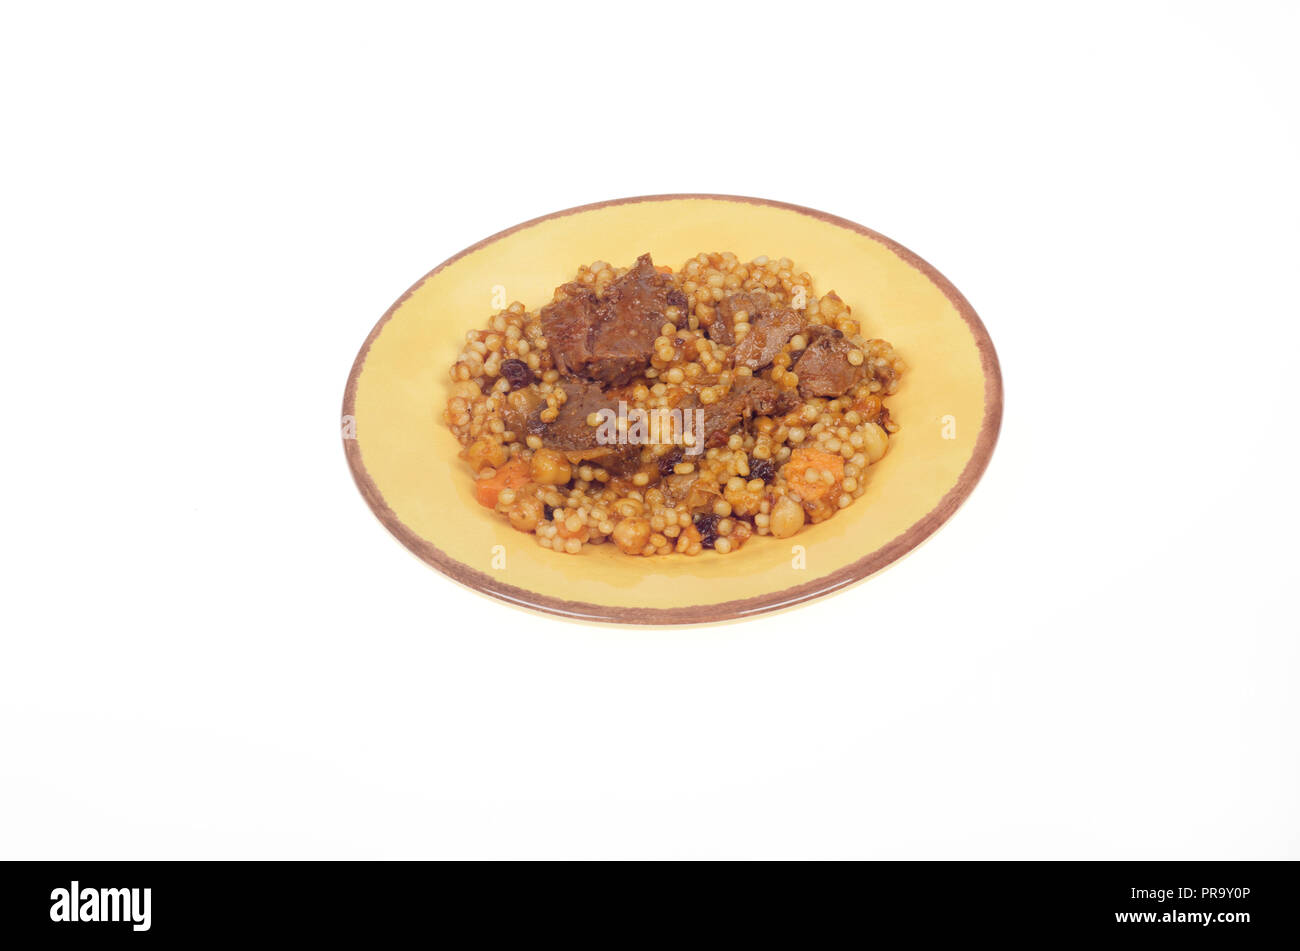 Plate with Morroccan style beef with couscous, carrots and chick peas Stock Photo